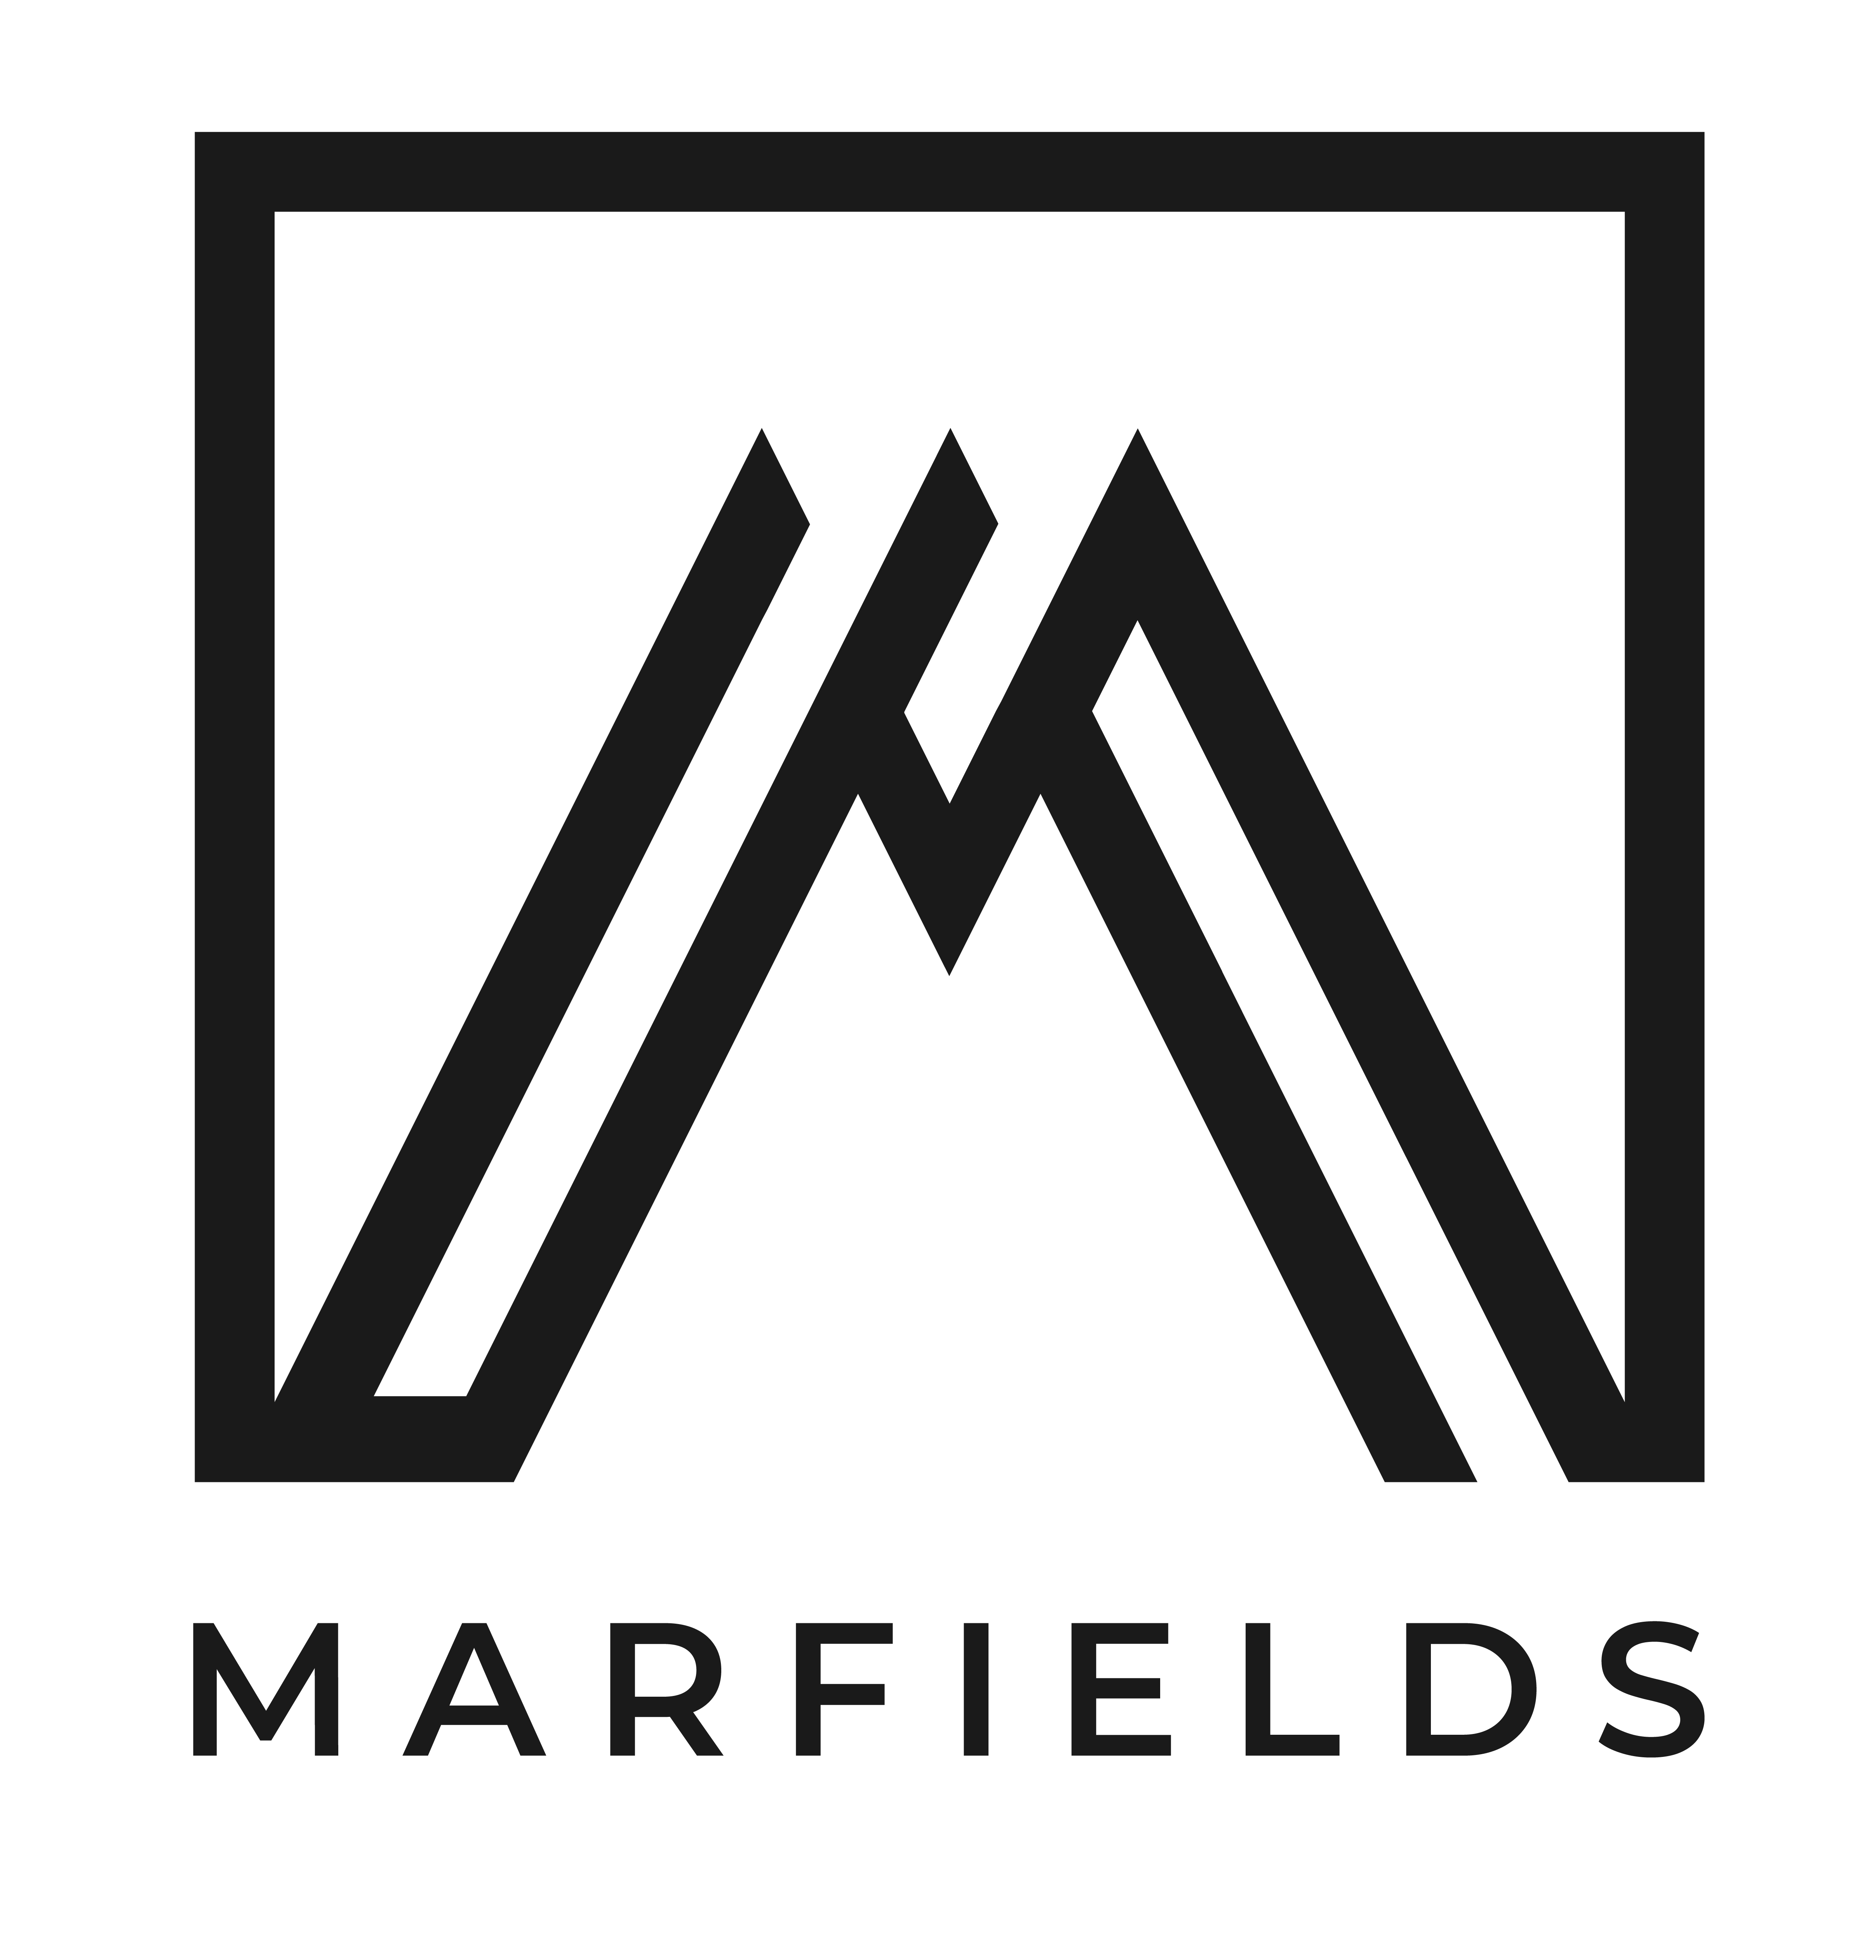 Marfields Group